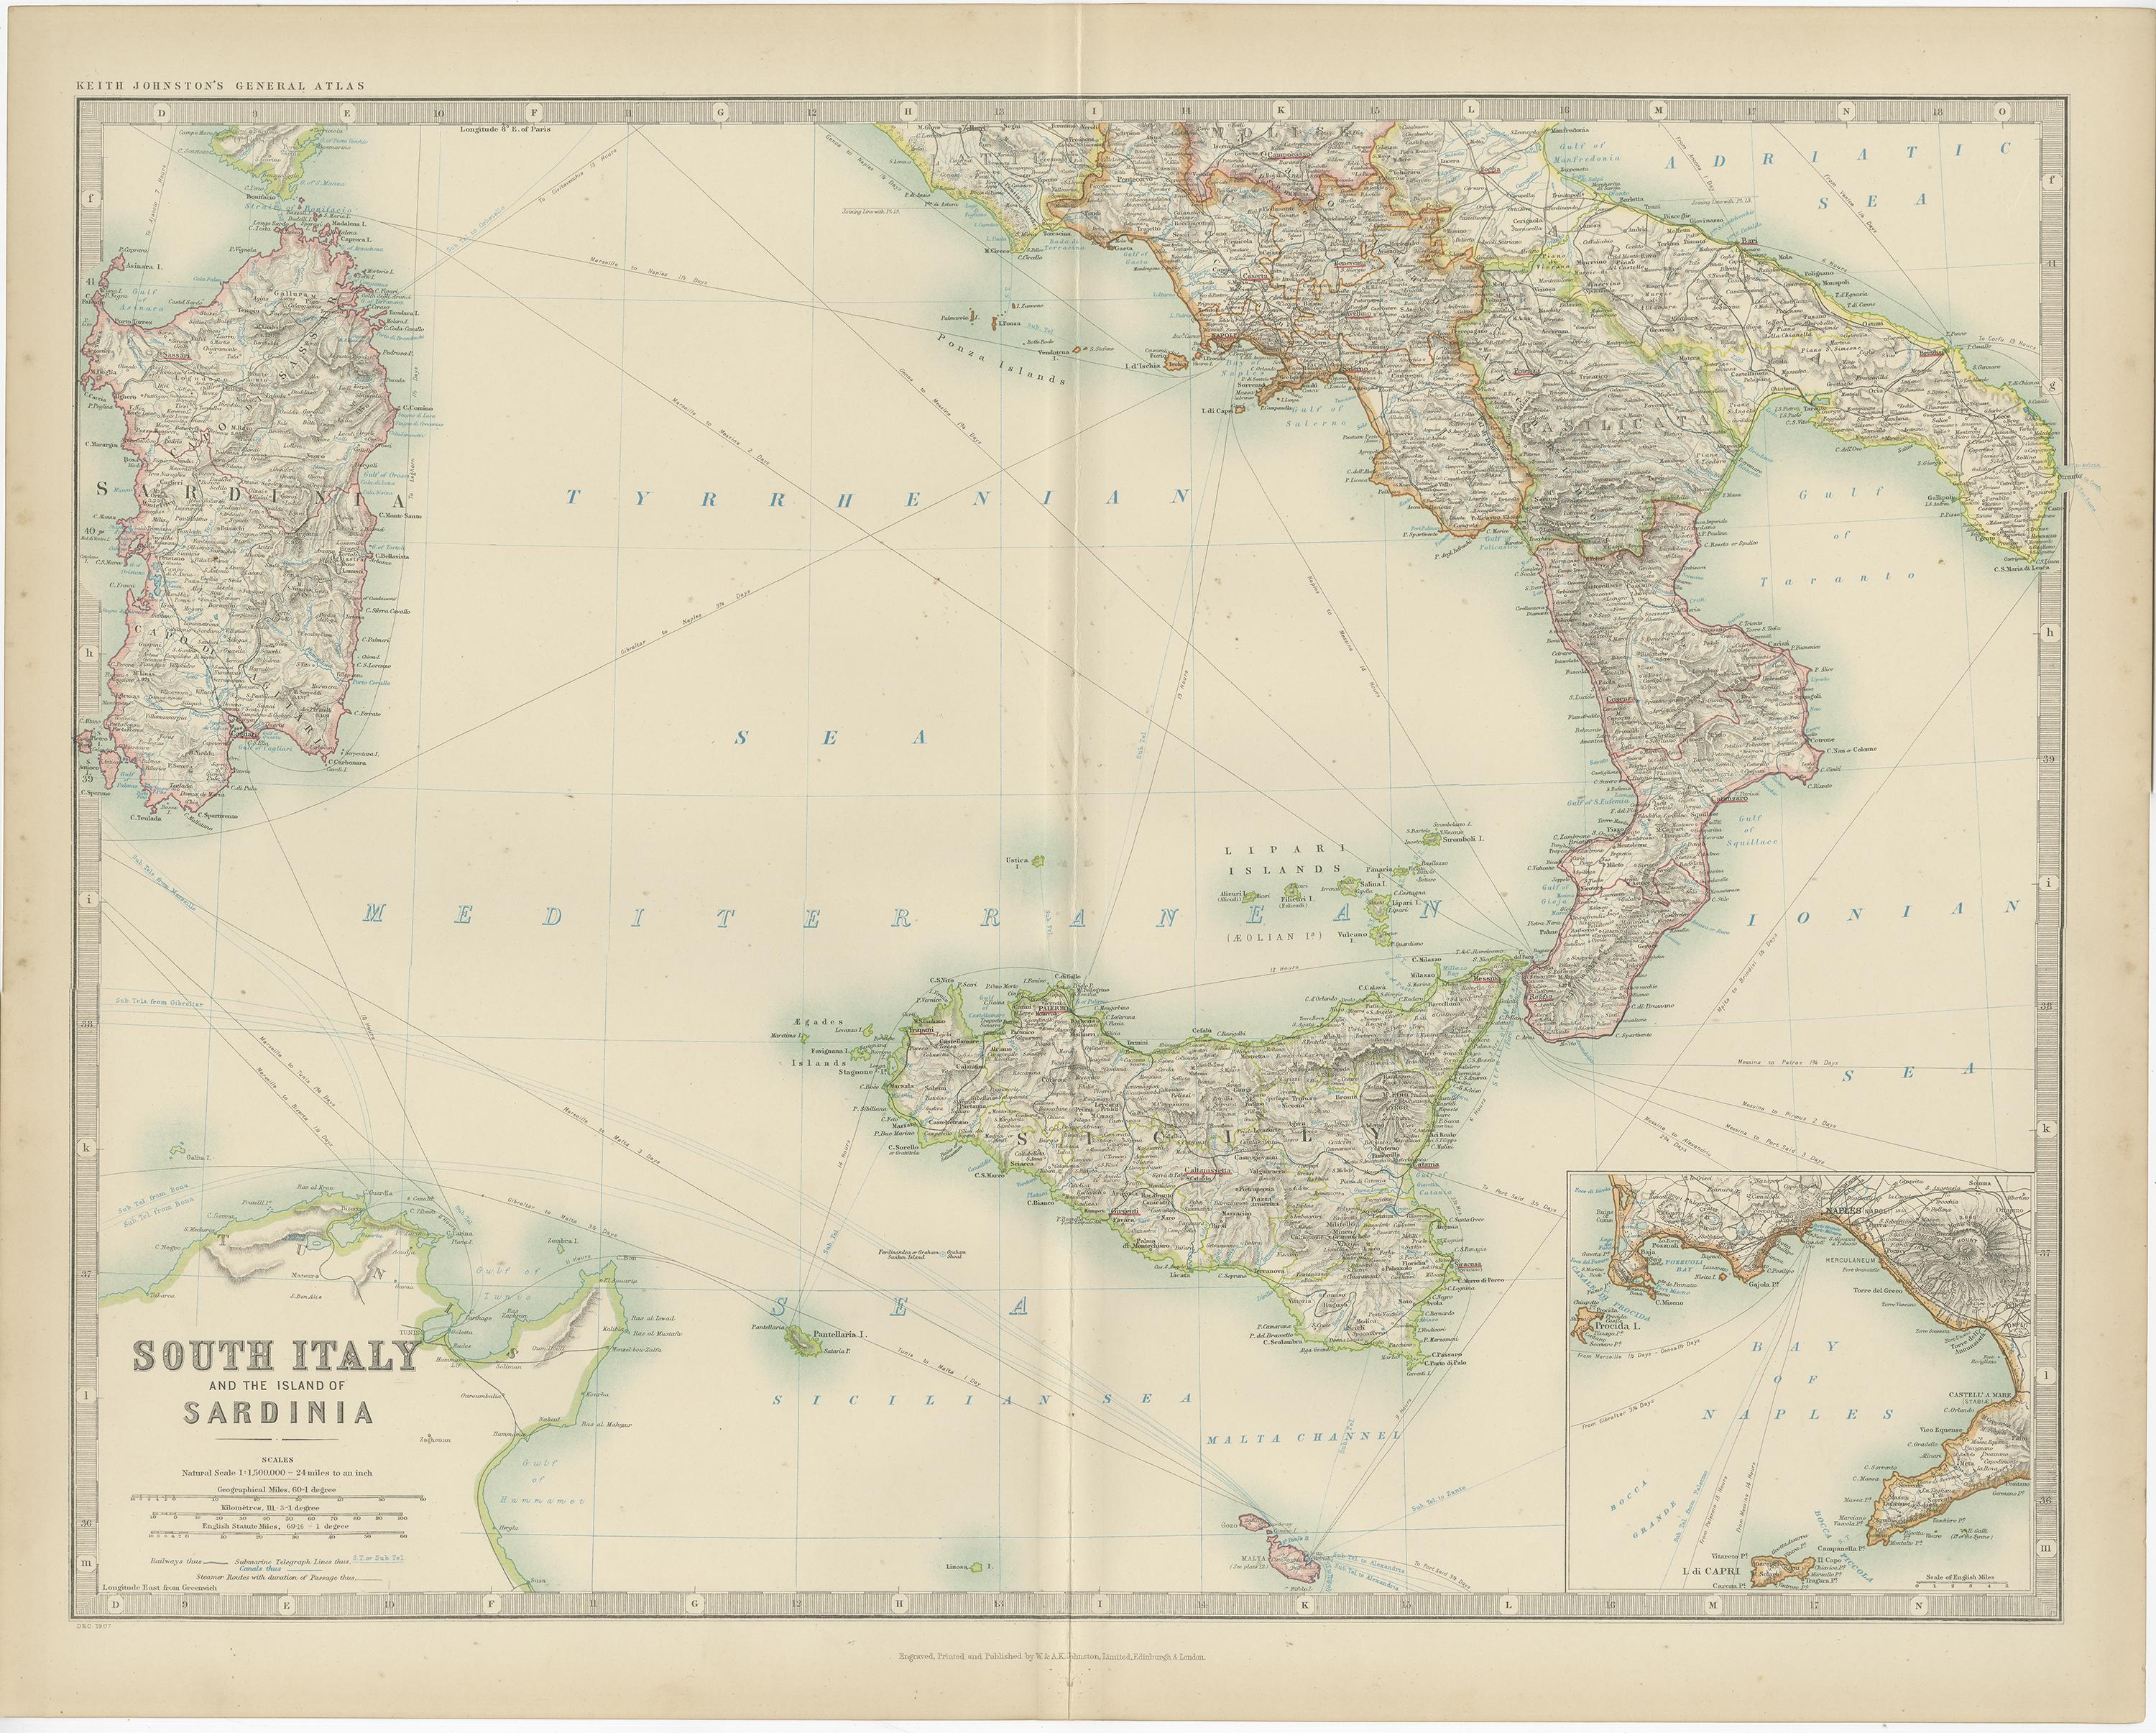 Antique map titled 'South Italy and the Island of Sardinia'. Original antique map of South Italy and the Island of Sardinia. With inset map of Naples. This map originates from the ‘Royal Atlas of Modern Geography’. Published by W. & A.K. Johnston,